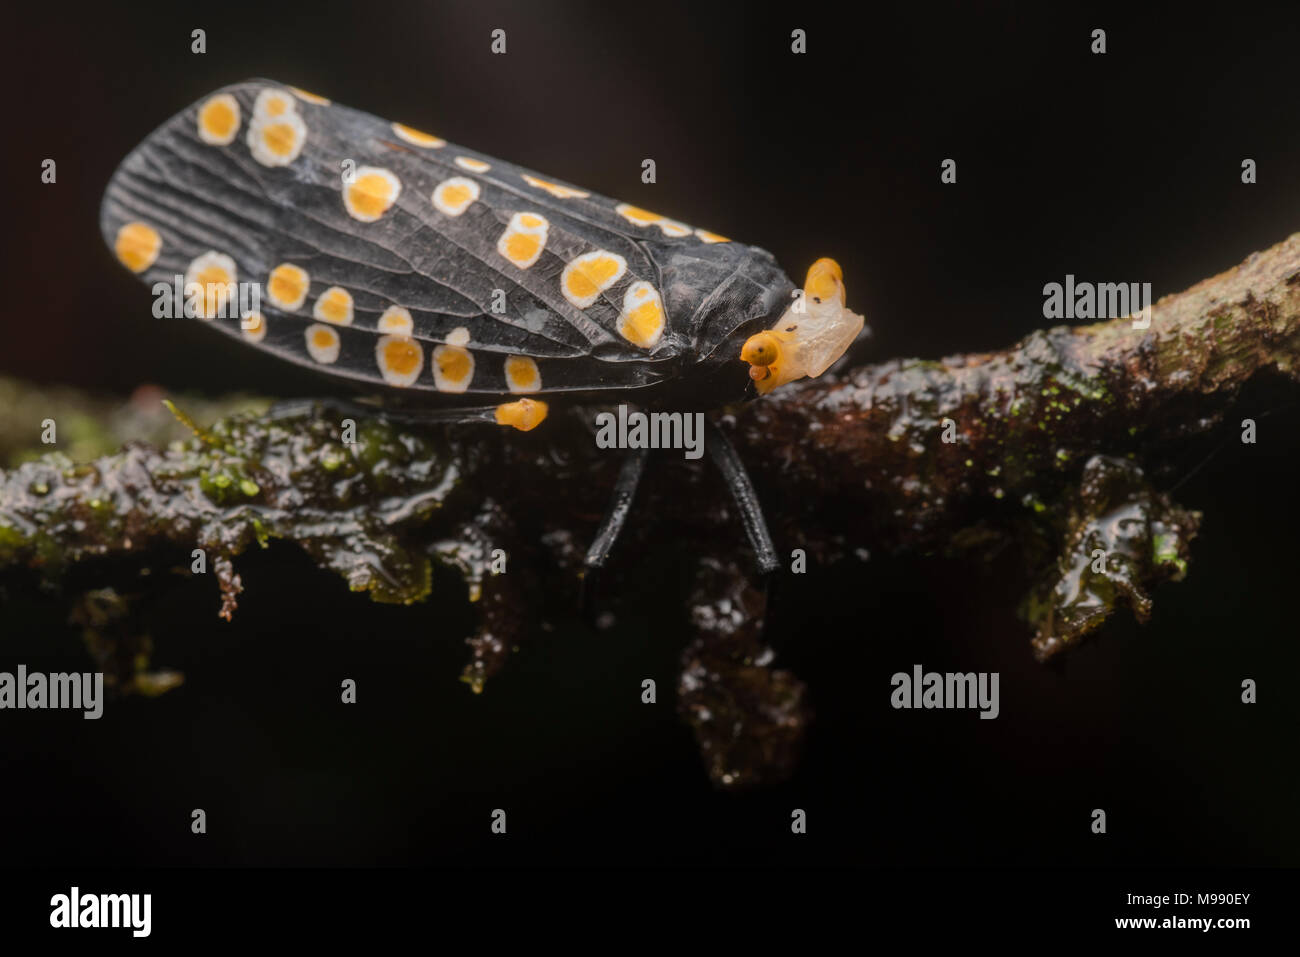 Some sort of polka dotted planthopper from the Peruvian cloud forest. Perhaps the bright color signals distastefulness to predators. Stock Photo